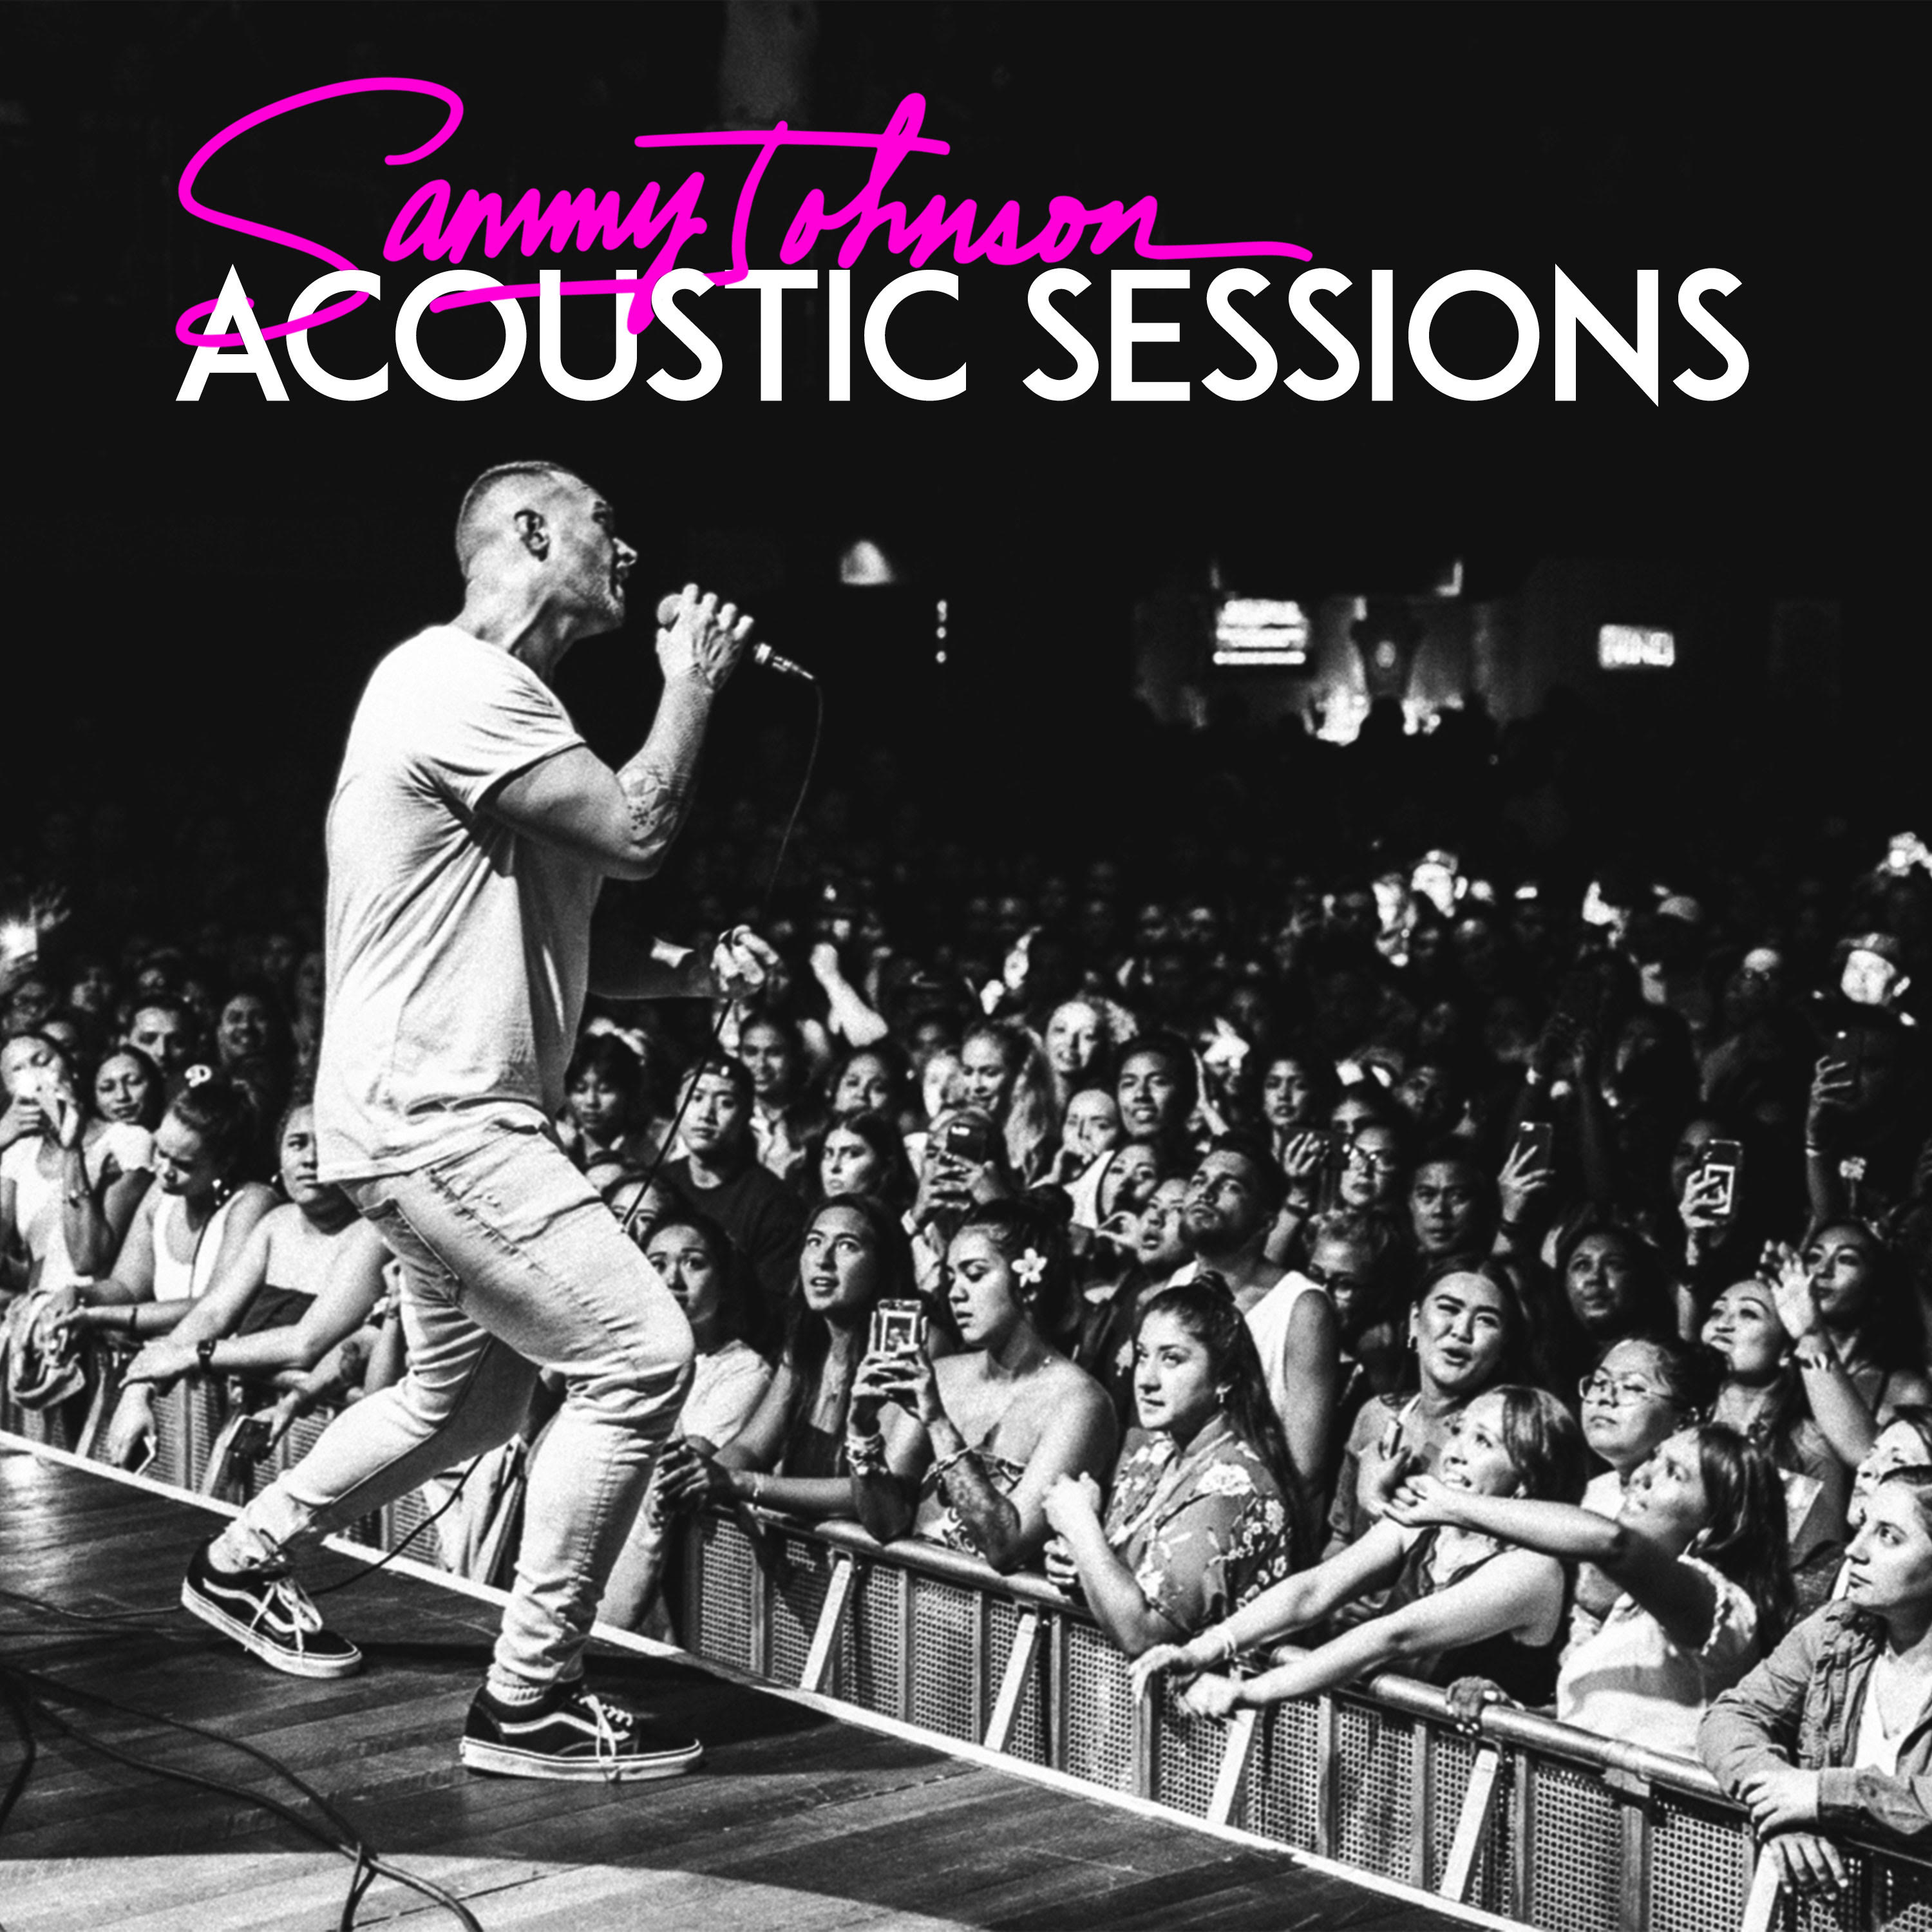 Sammy Johnson releases new ‘Acoustic Sessions’ album and Concert Video